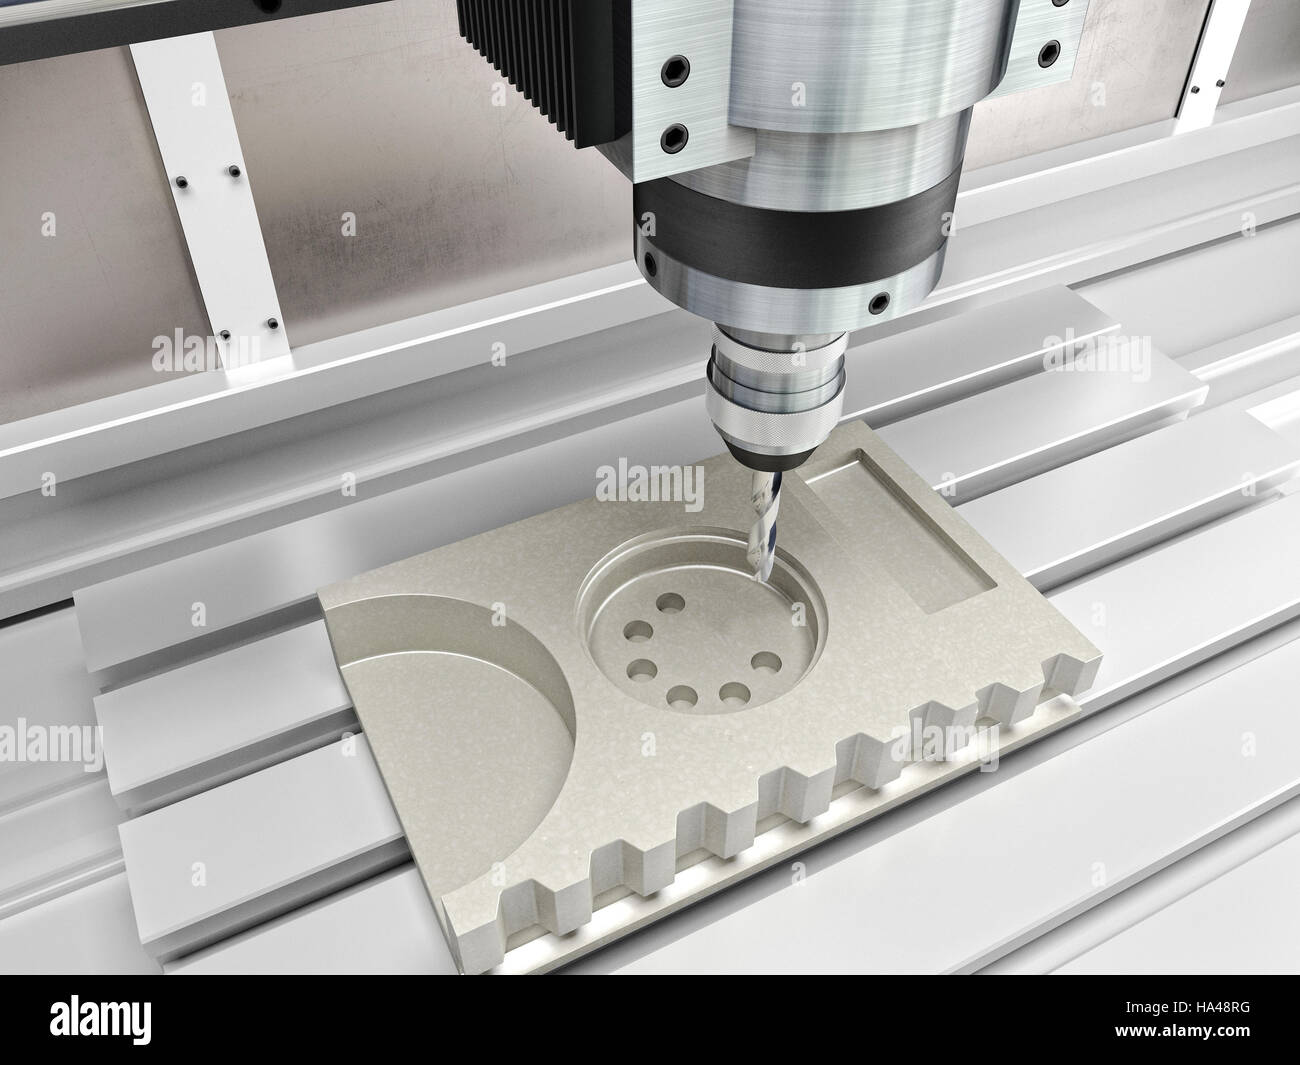 cnc machine in action 3d rendering Stock Photo